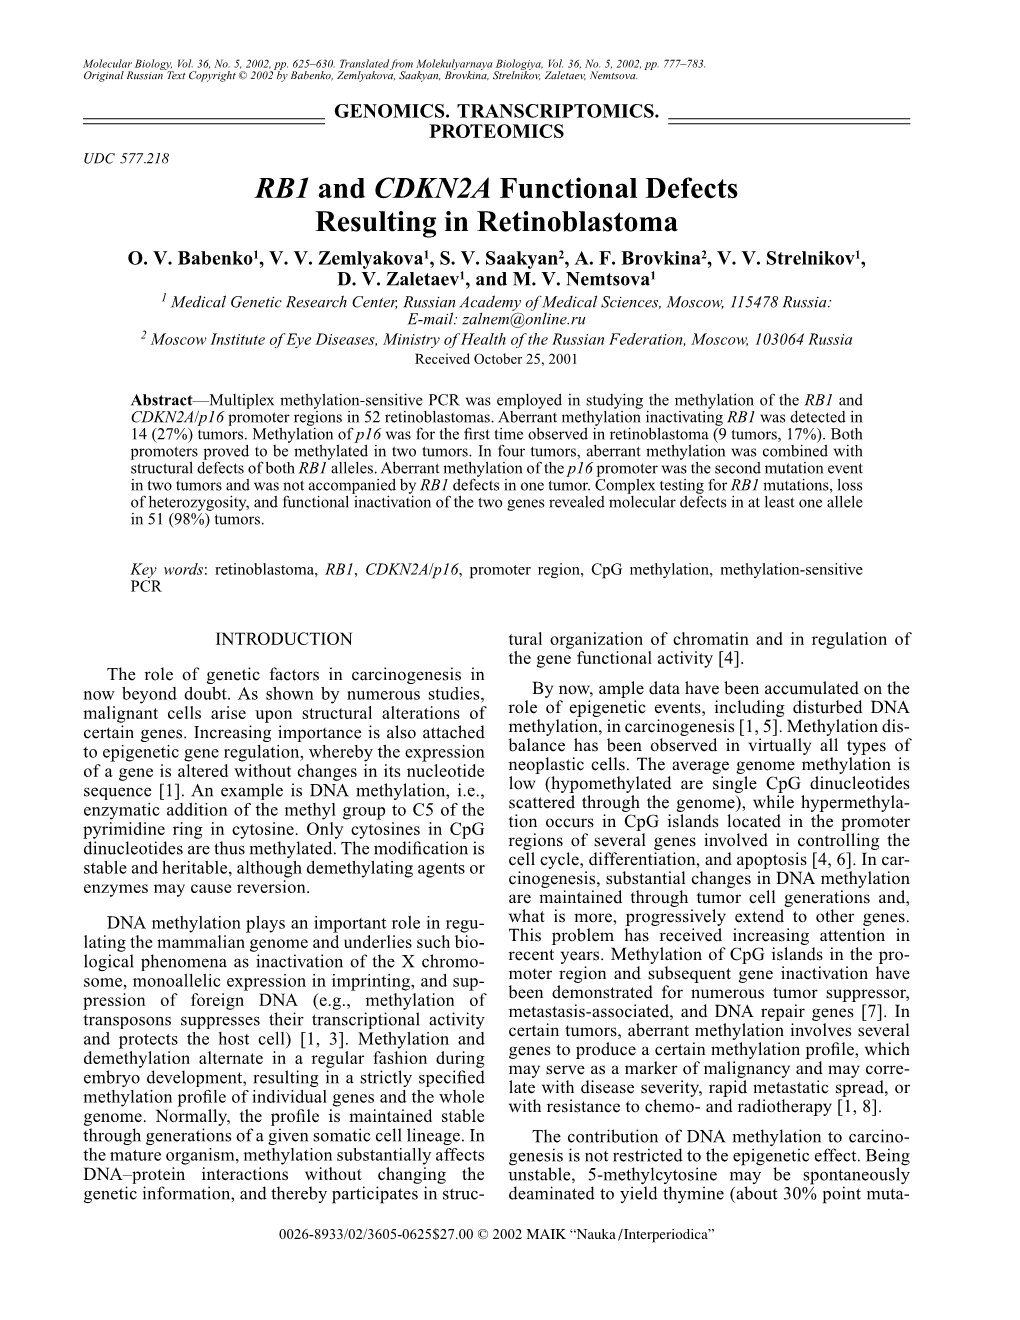 RB1 and CDKN2A Functional Defects Resulting in Retinoblastoma O